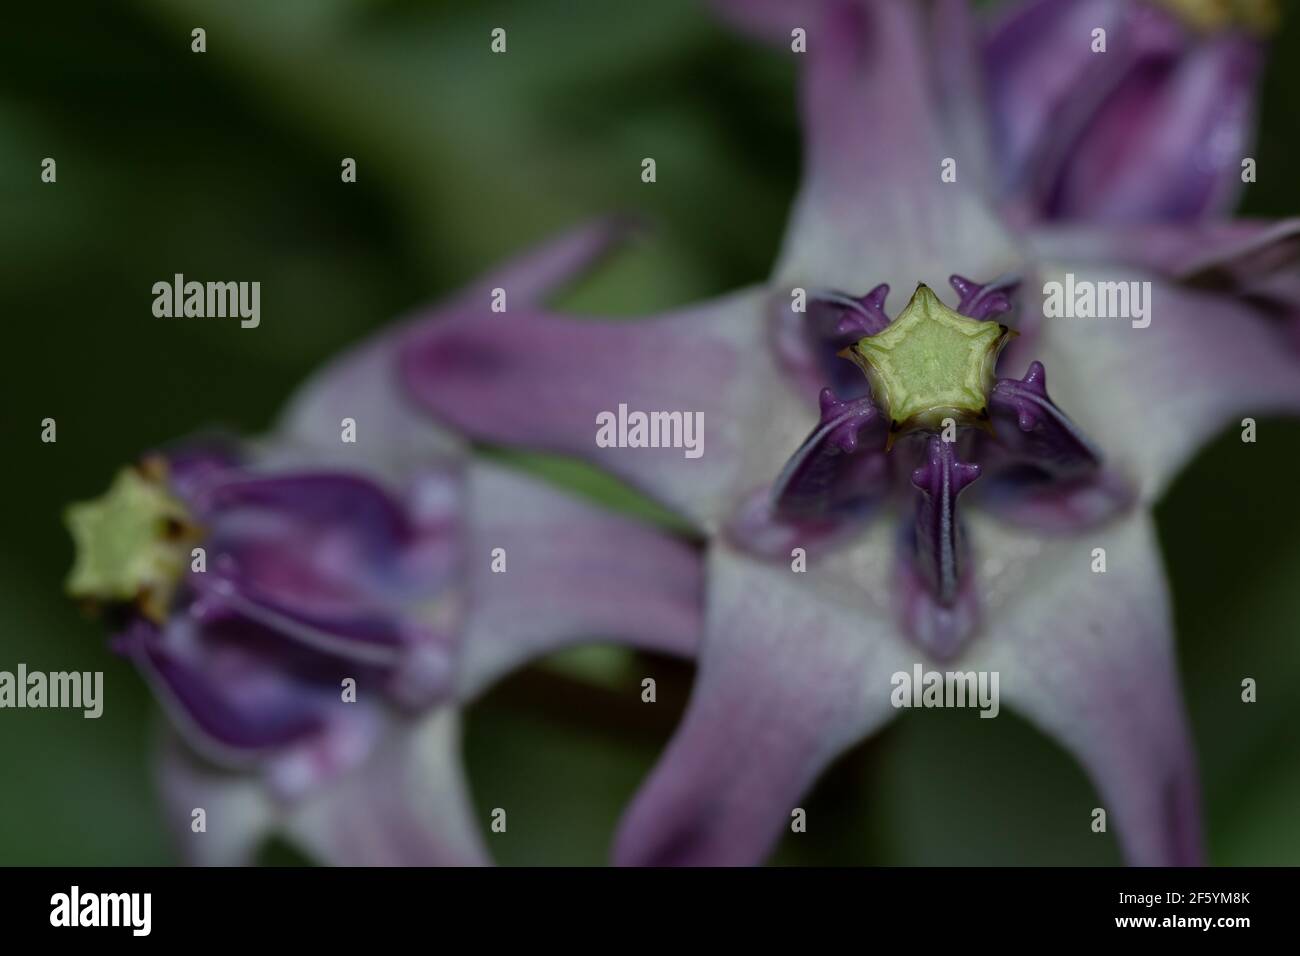 An Abstract selective focus image of a flower with purple petals blooming Stock Photo